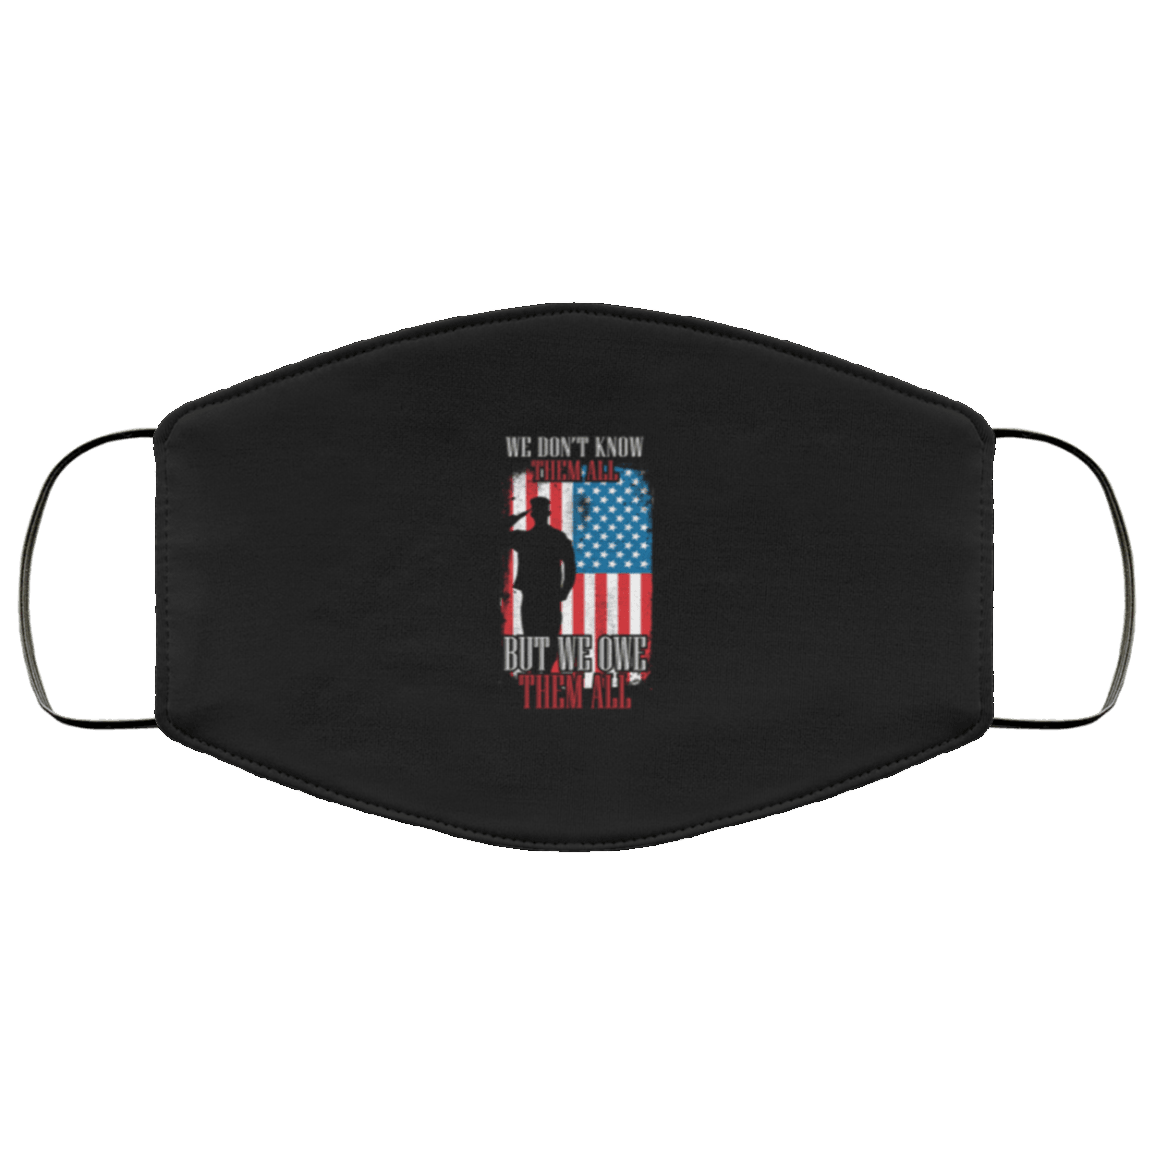 Designs by MyUtopia Shout Out:We Owe Them All Armed Forces US Flag Adult Fabric Face Mask with Elastic Ear Loops,3 Layer Fabric Face Mask / Black / Adult,Fabric Face Mask